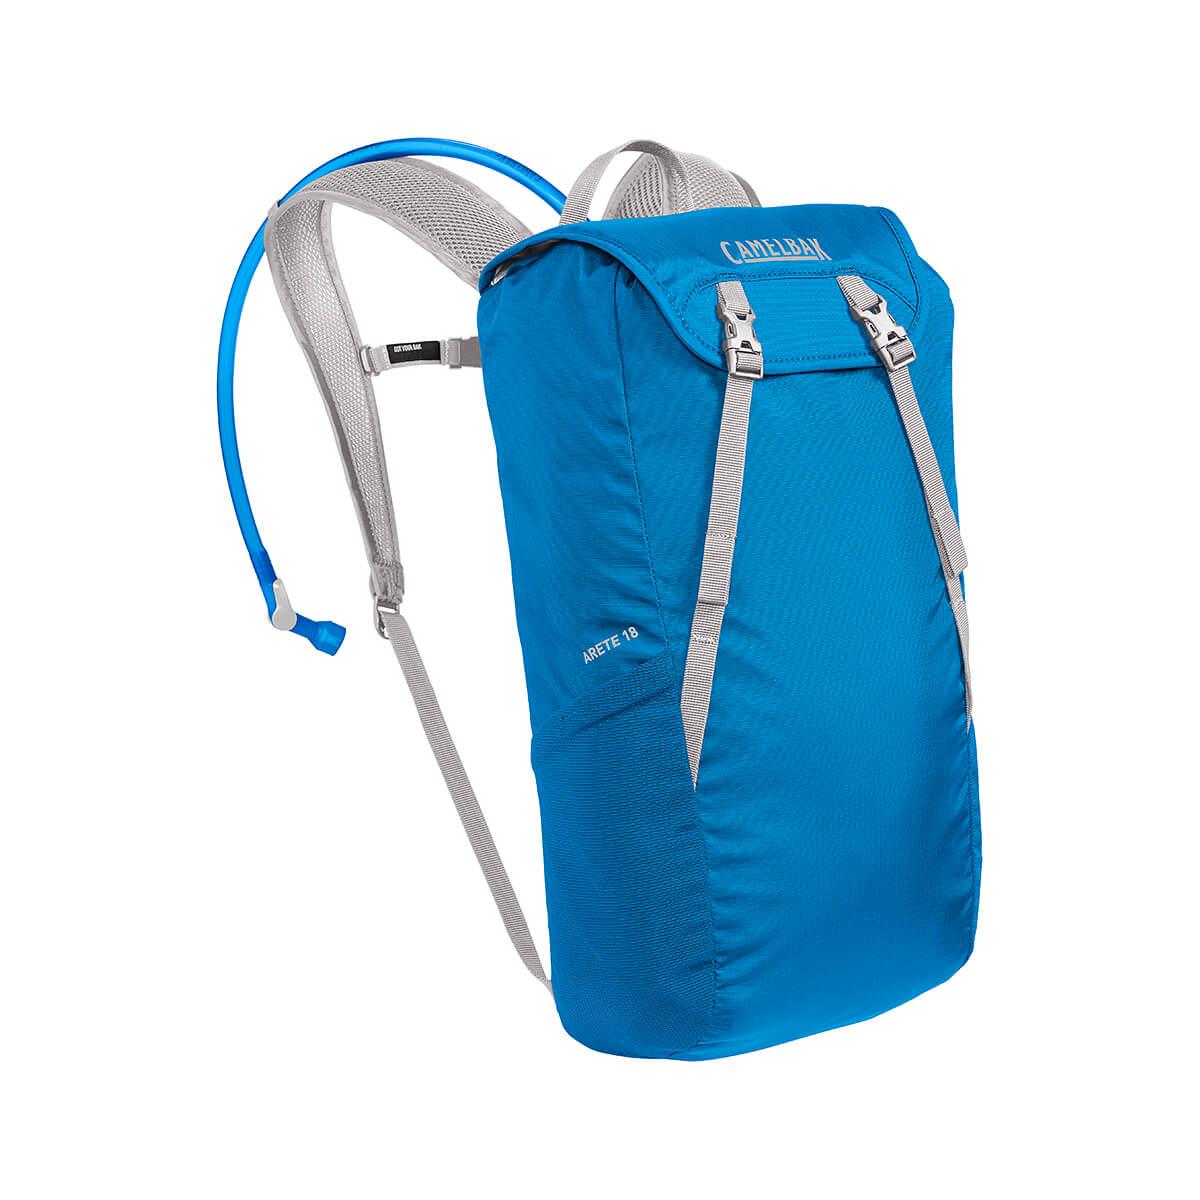  Arete 18 Hydration Pack